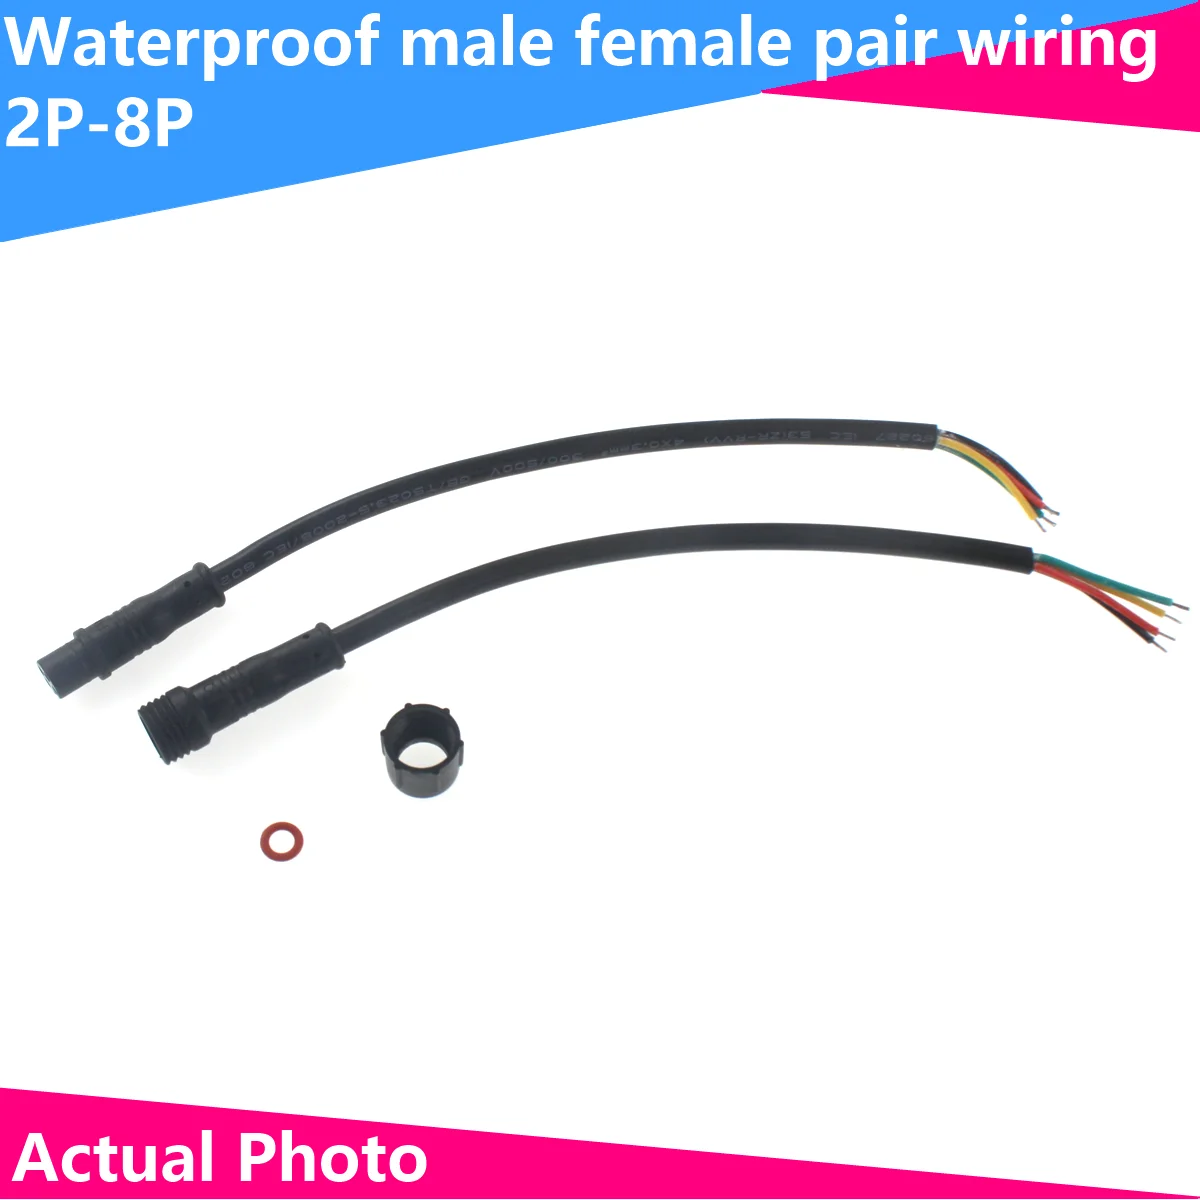 Waterproof Male Female Docking Plug 2/3/4/5/8P pin Aviation Industry Power Supply Quick Connector Outdoor LED Wire Socket AWG aviation plug and socket gx16 2 3 4 5 6 7 8p core docking male and female connector plug and socket set